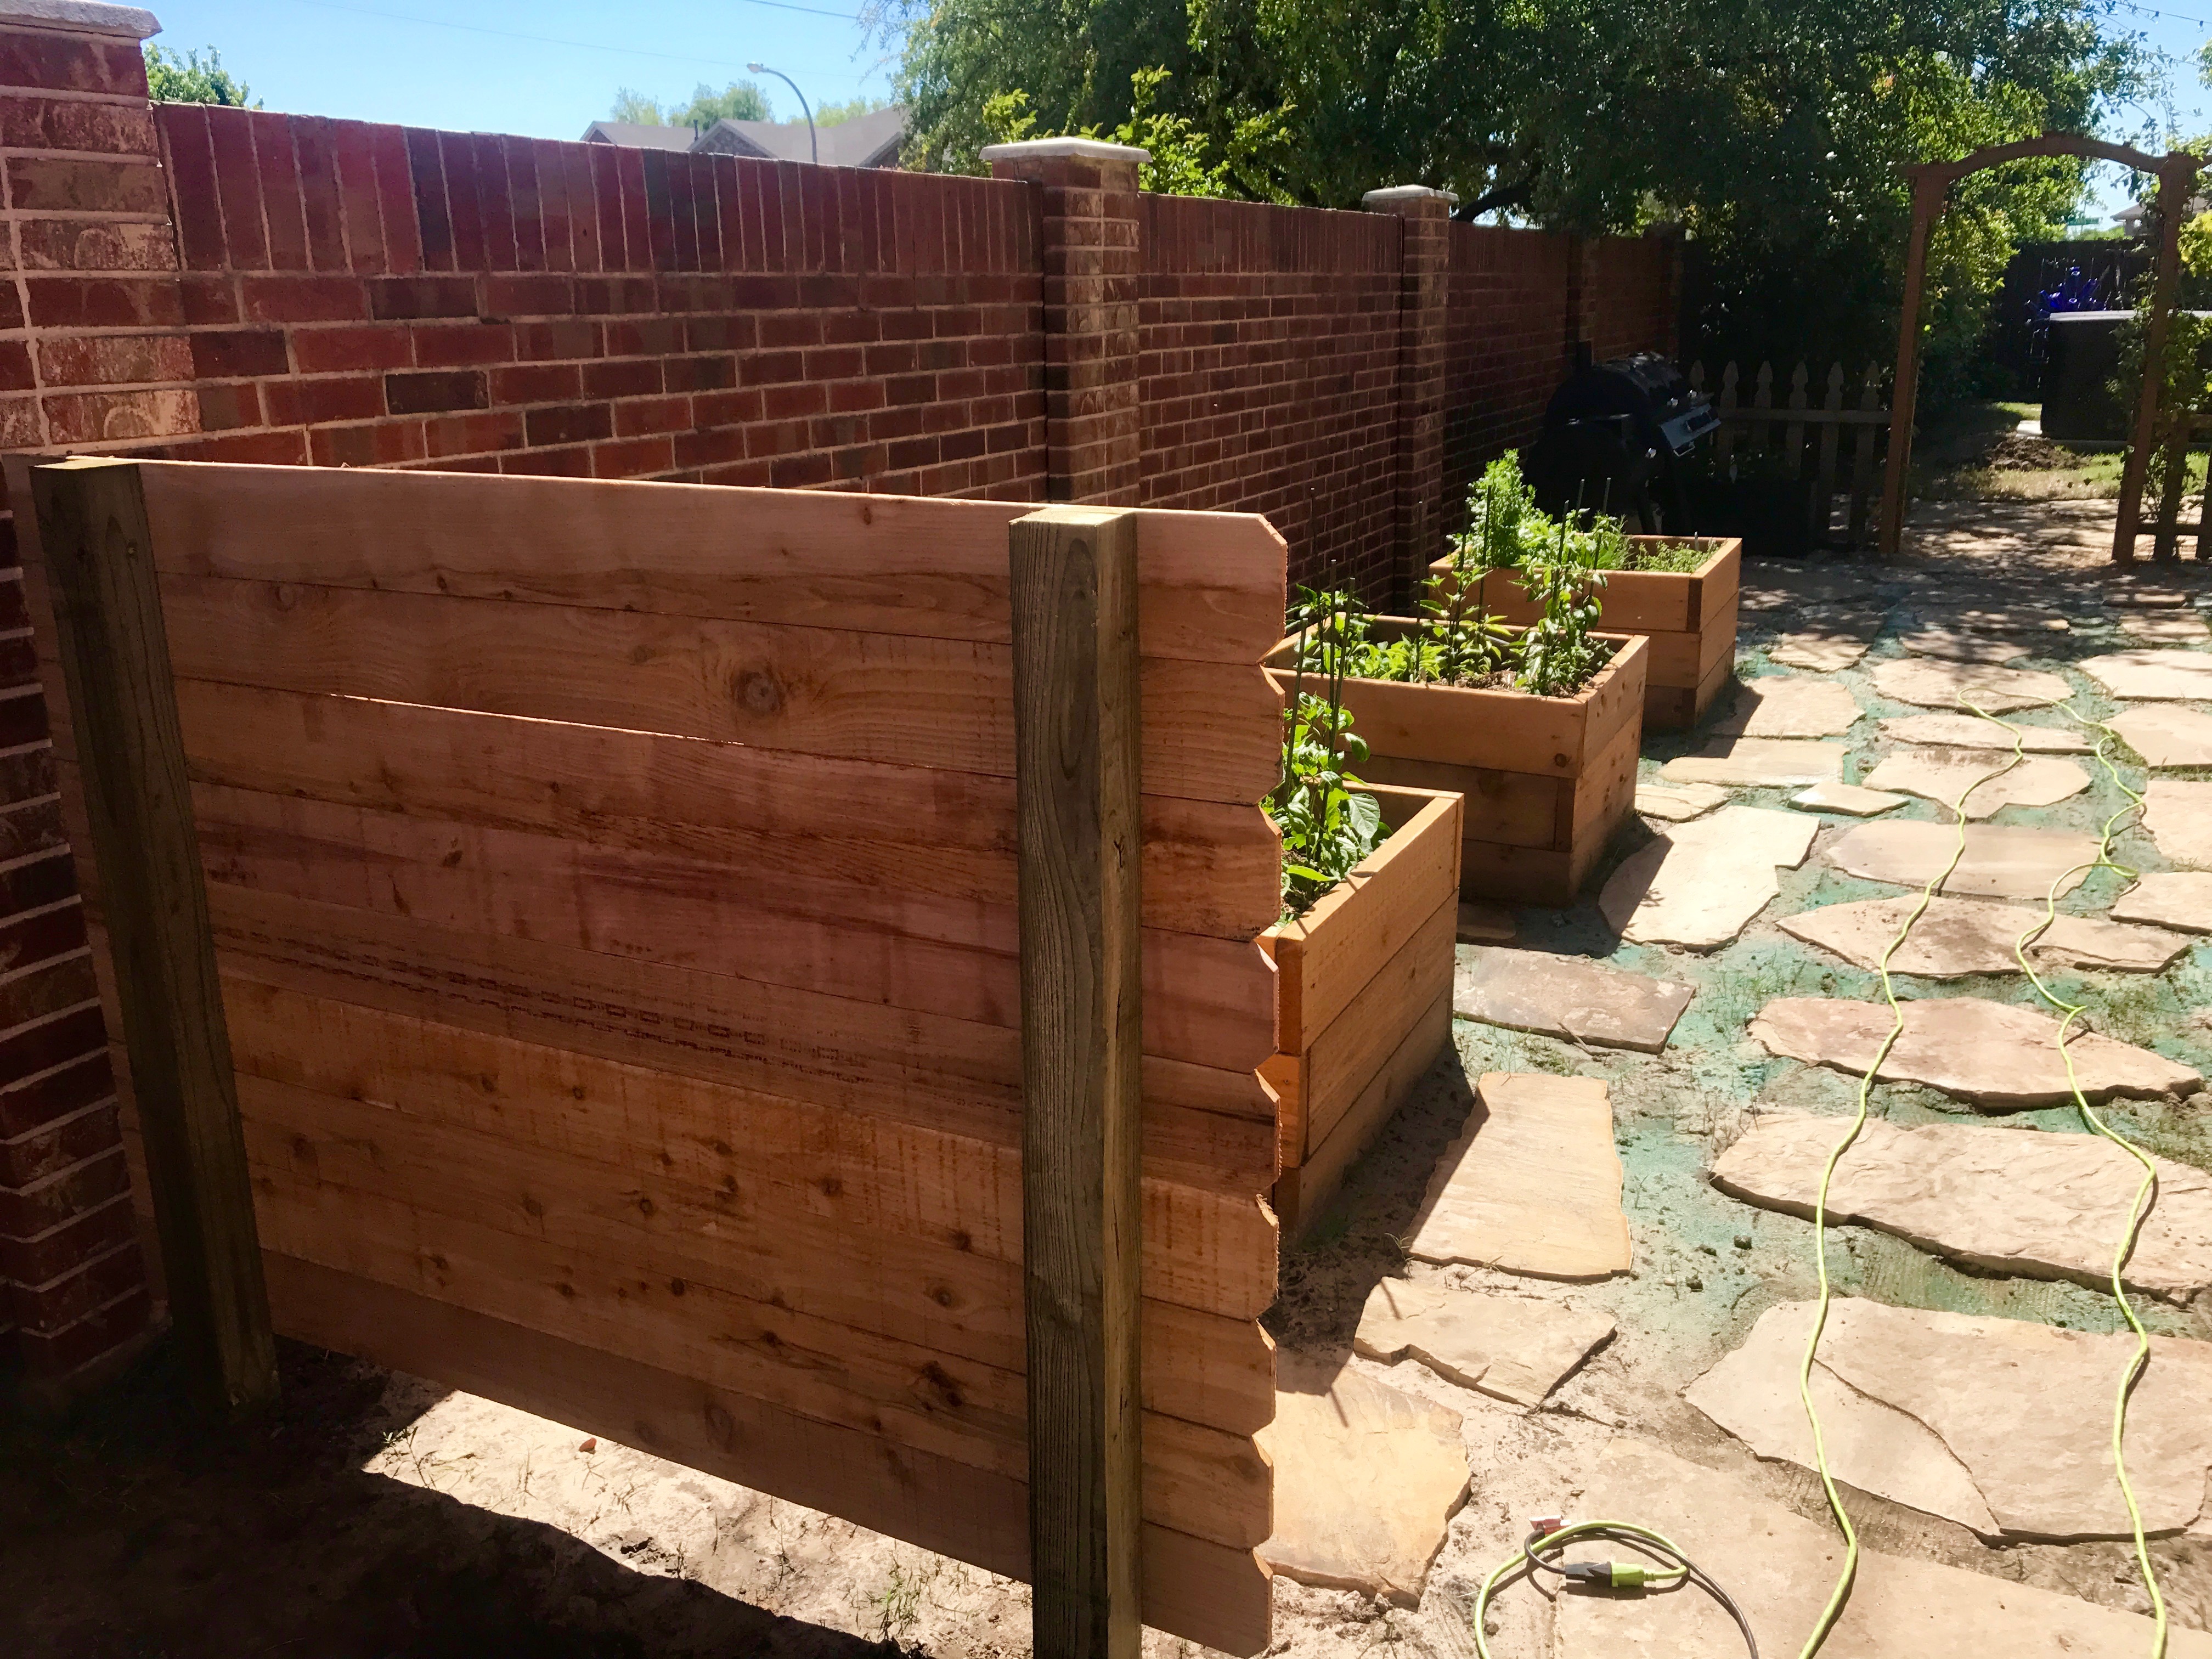 How to build a simple trash can screen out of fence boards.